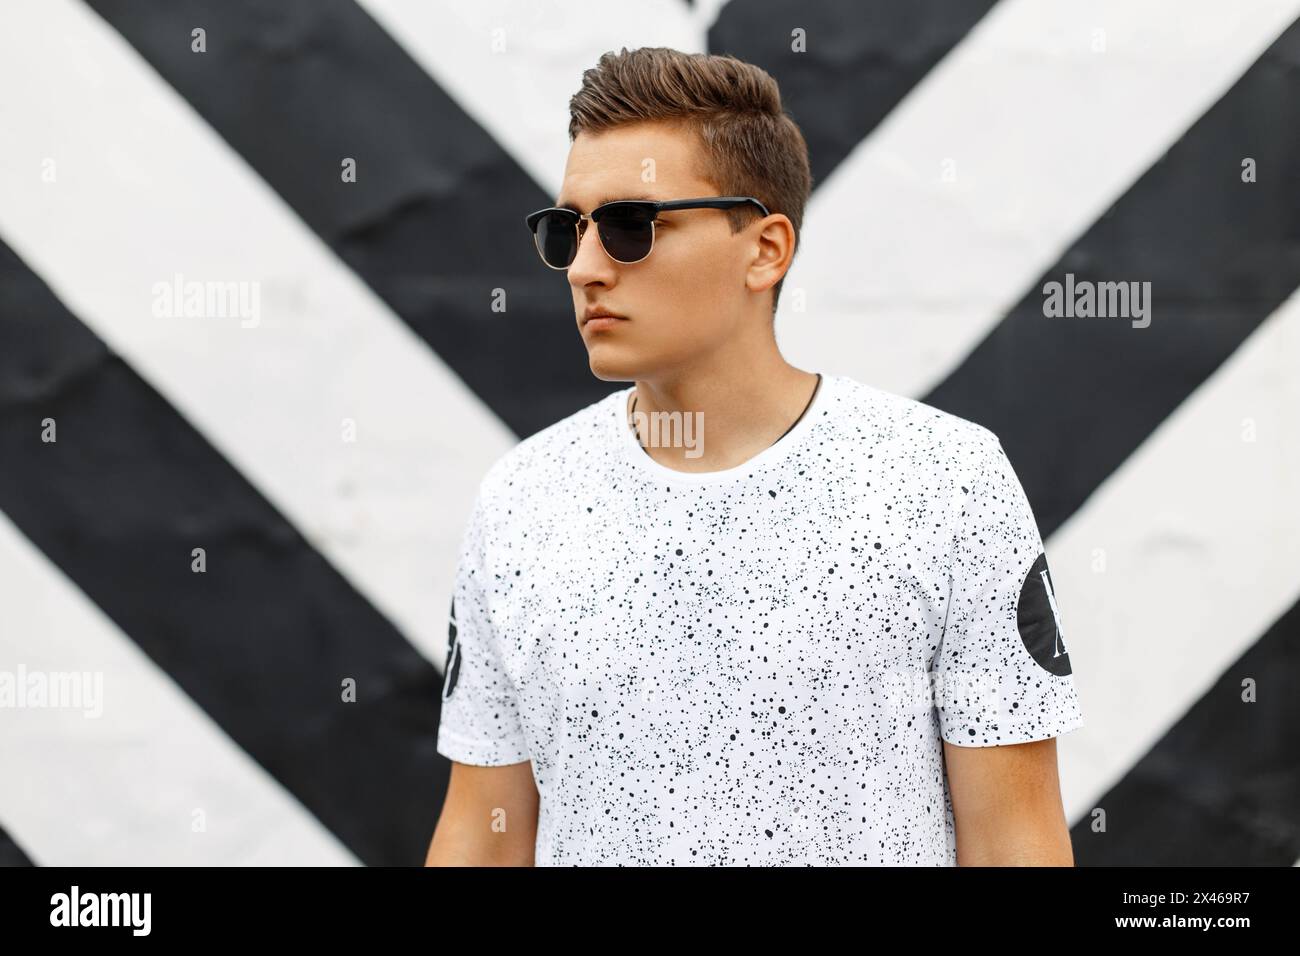 Handsome Man In Sunglasses And A White T-shirt With Spots On A Background Of Black And White Lines. Stock Photo